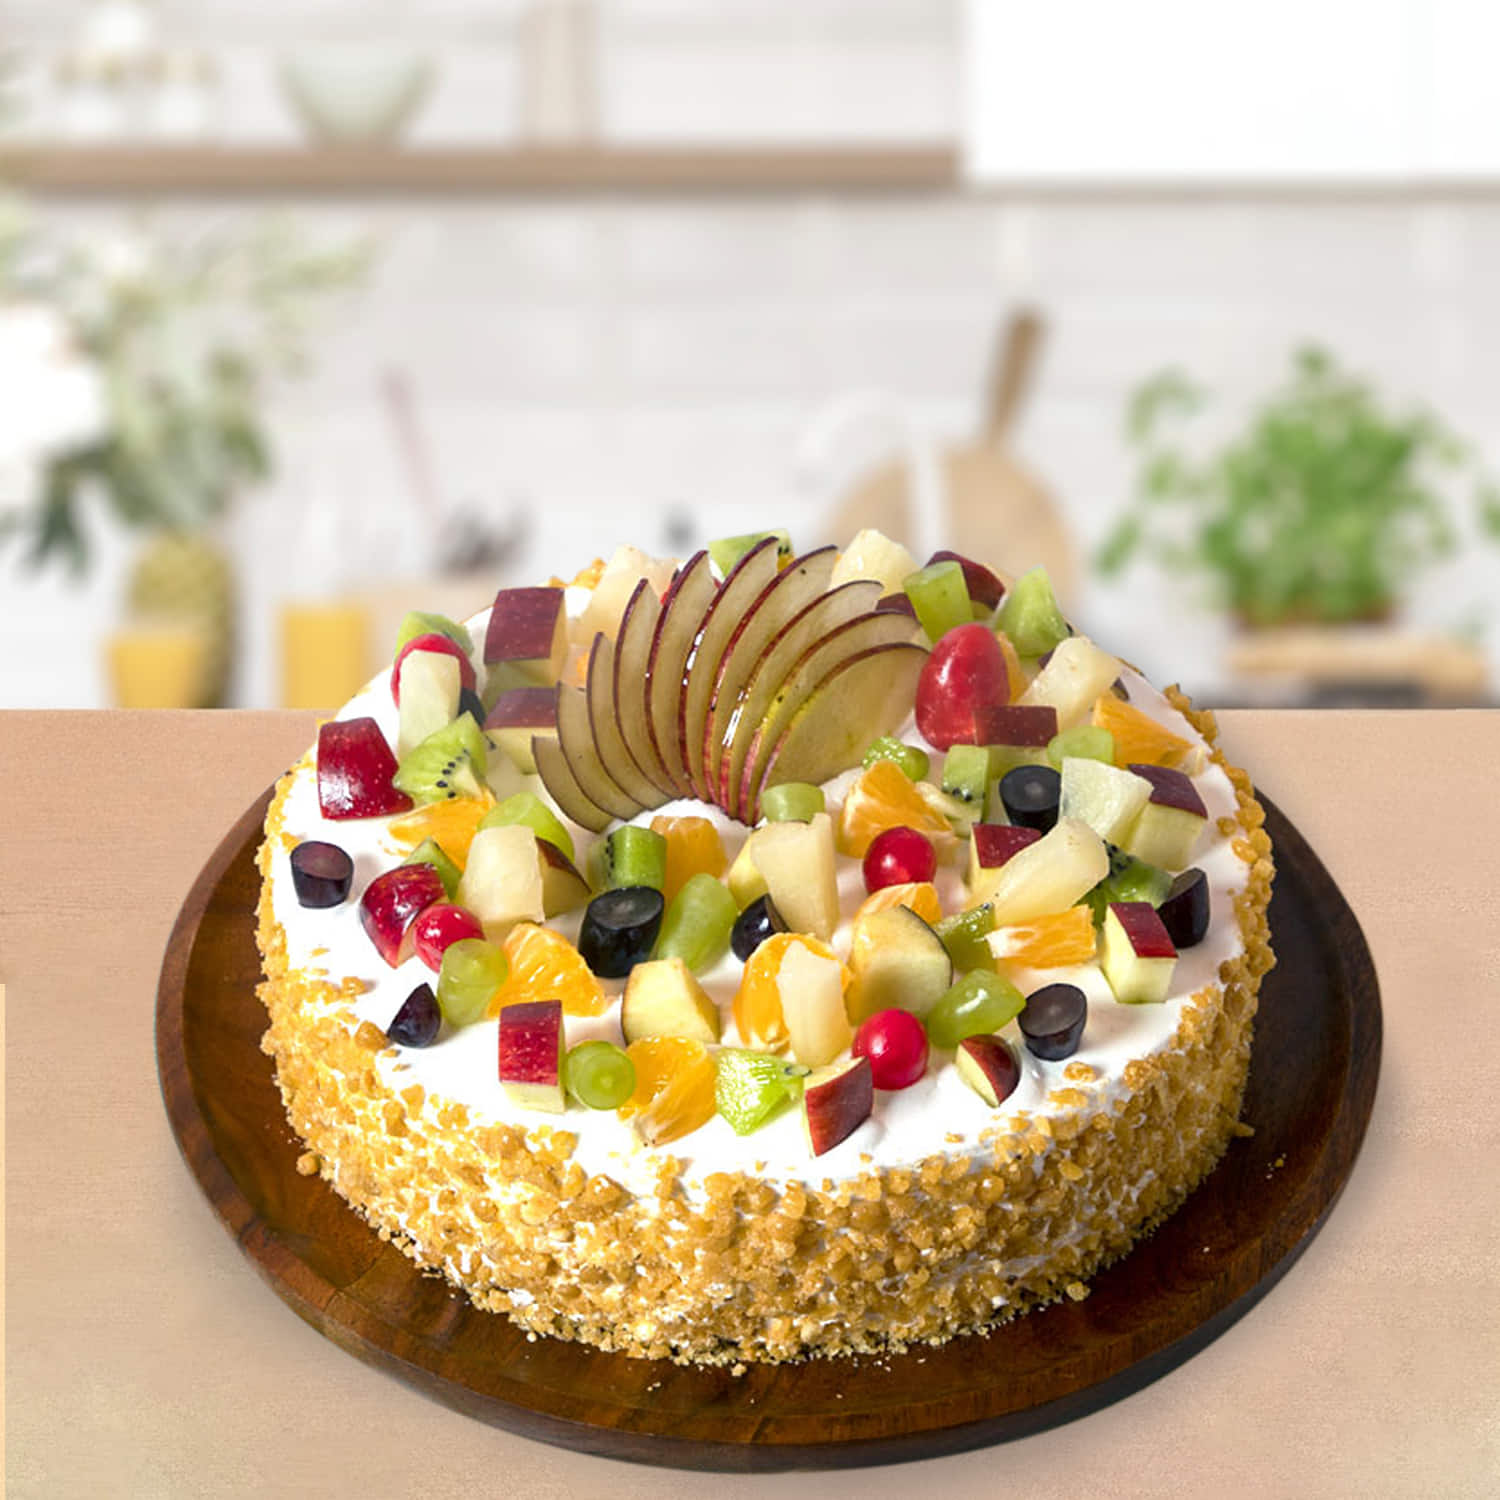 Mixed Fruit Delicious Dry Cake - Buy, Send & Order Online Delivery In India  - Cake2homes